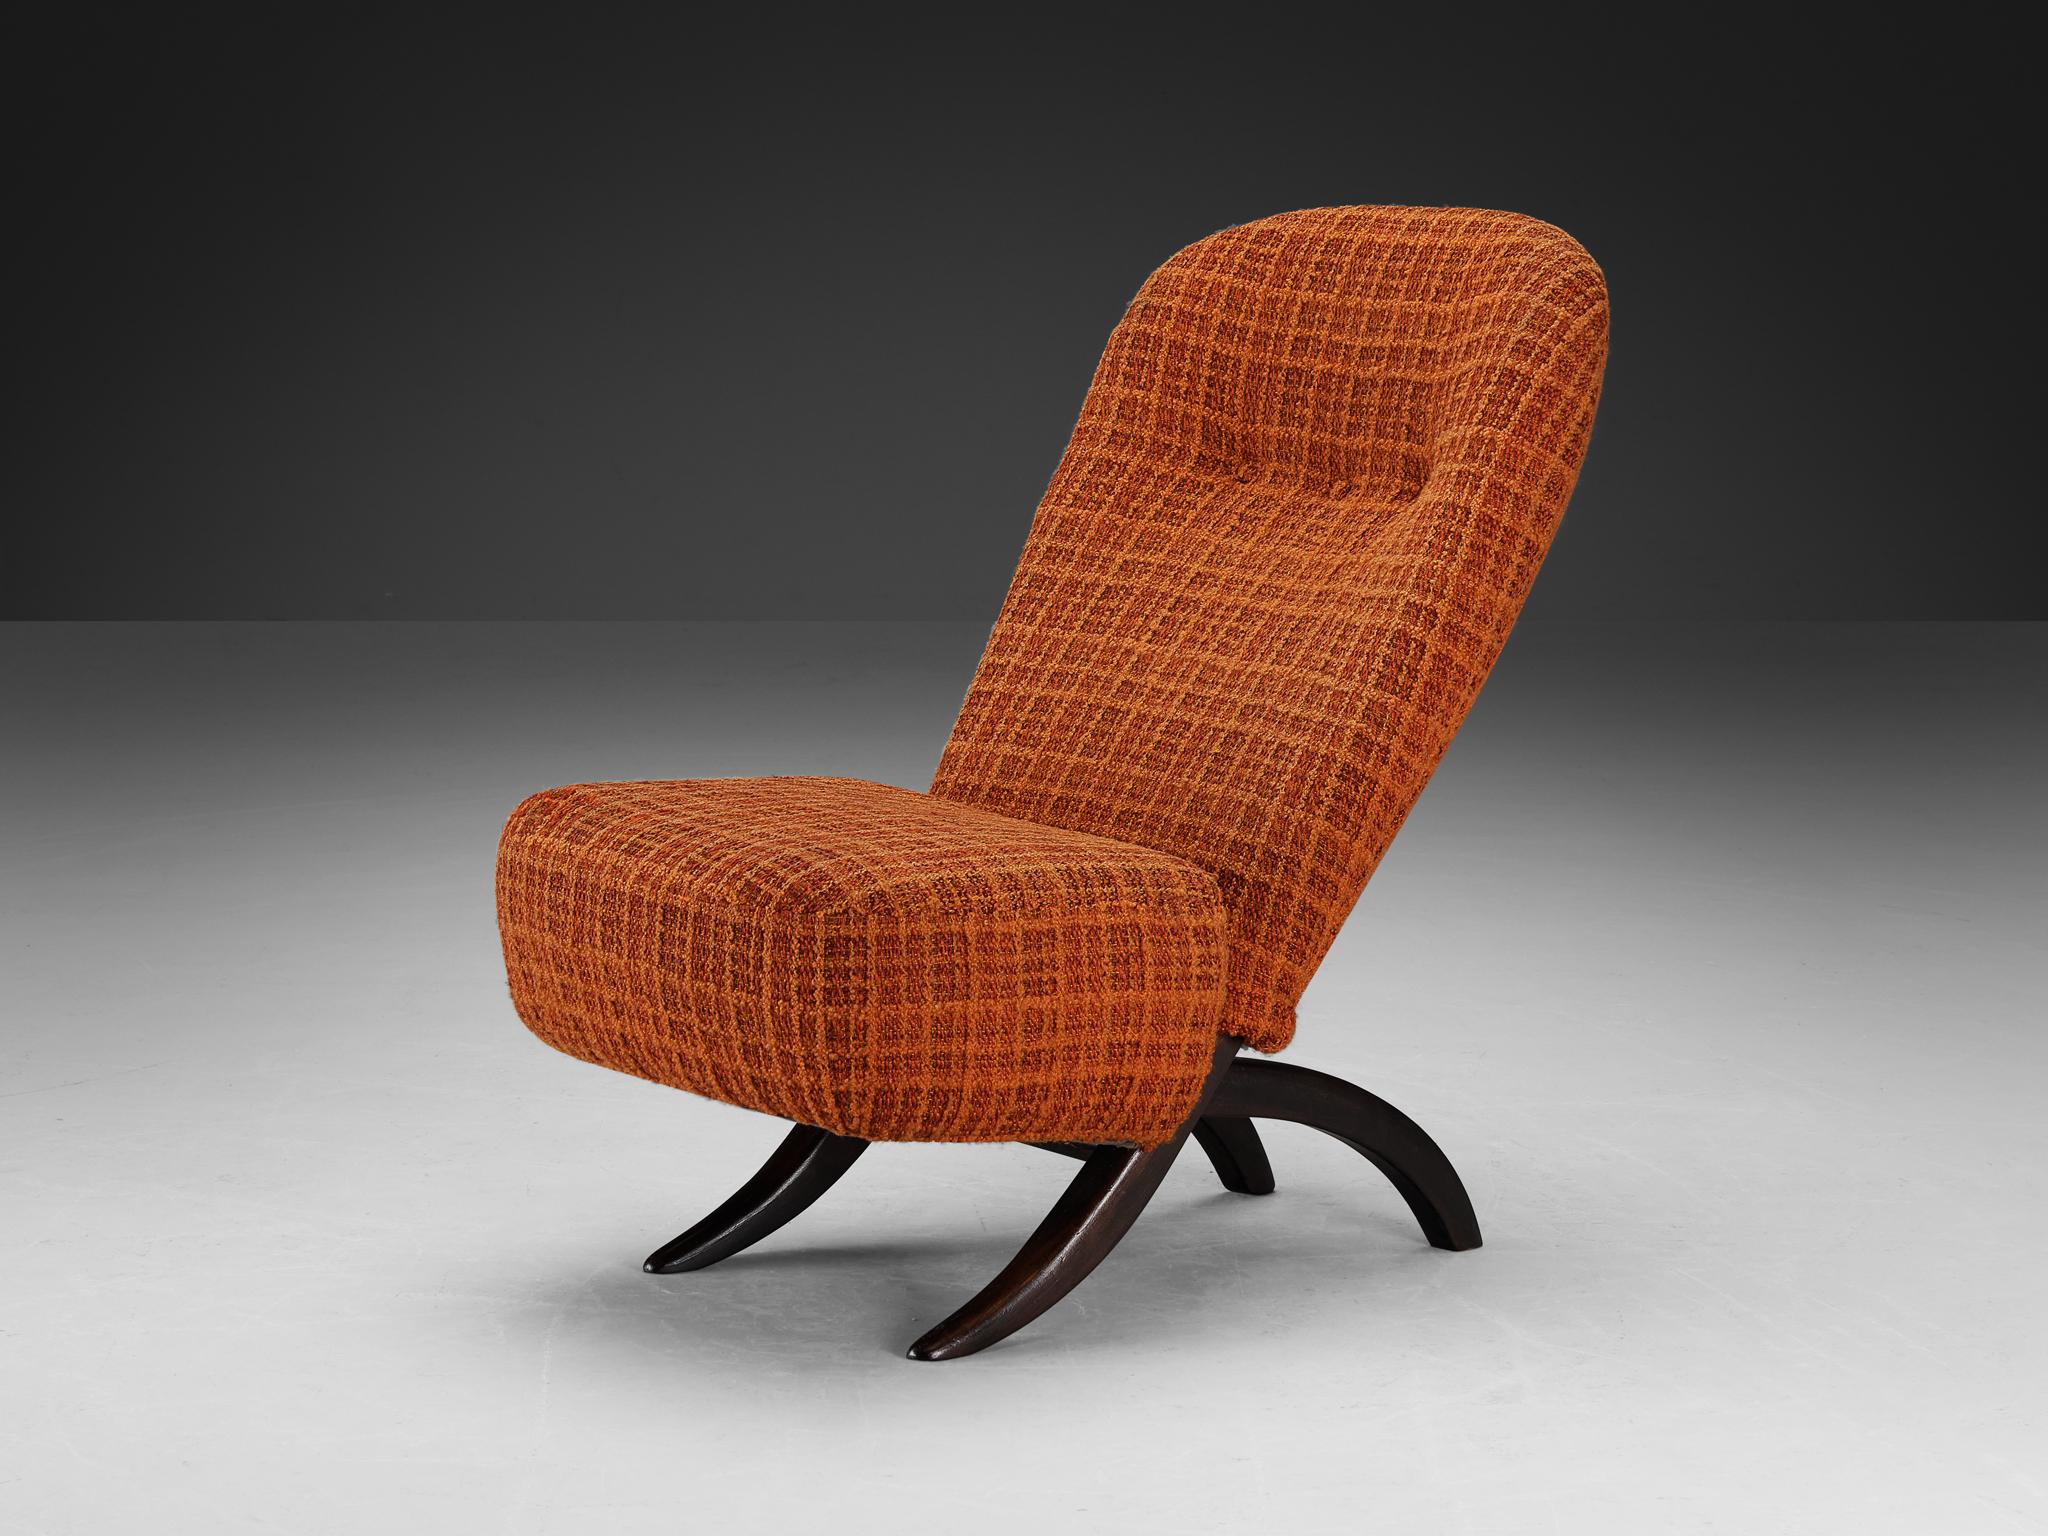 Theo Ruth for Artifort, ‘Congo’ lounge chair, stained ash, fabric, The Netherlands, 1952

Known as an iconic creation of the Artifort's production line, the Congo easy chair embraces a distinctive design characterized by graceful lines and whimsical